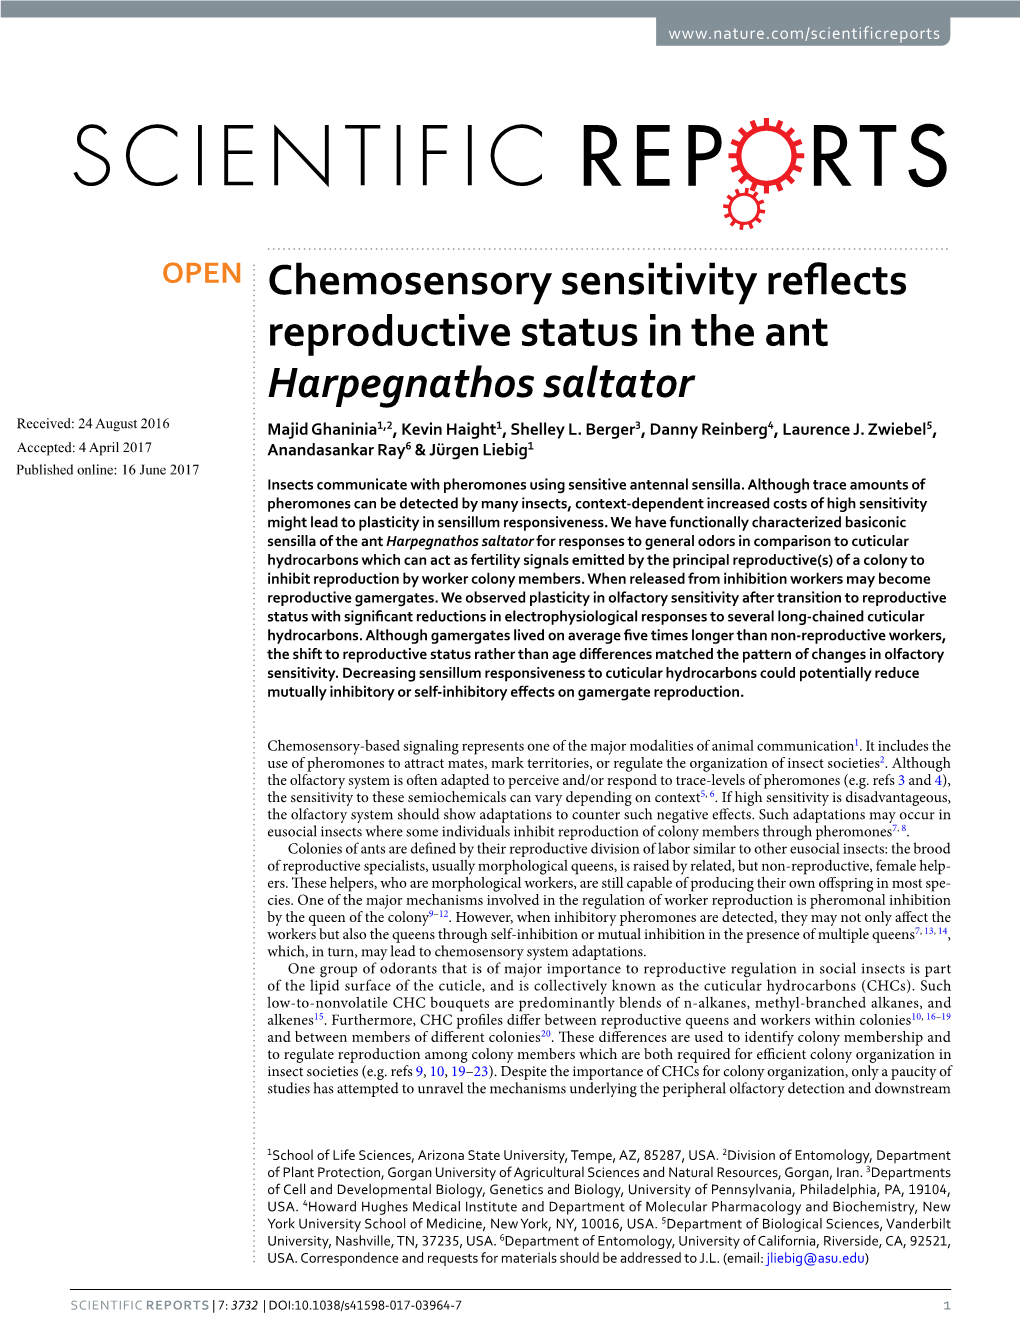 Chemosensory Sensitivity Reflects Reproductive Status in the Ant Harpegnathos Saltator Received: 24 August 2016 Majid Ghaninia1,2, Kevin Haight1, Shelley L